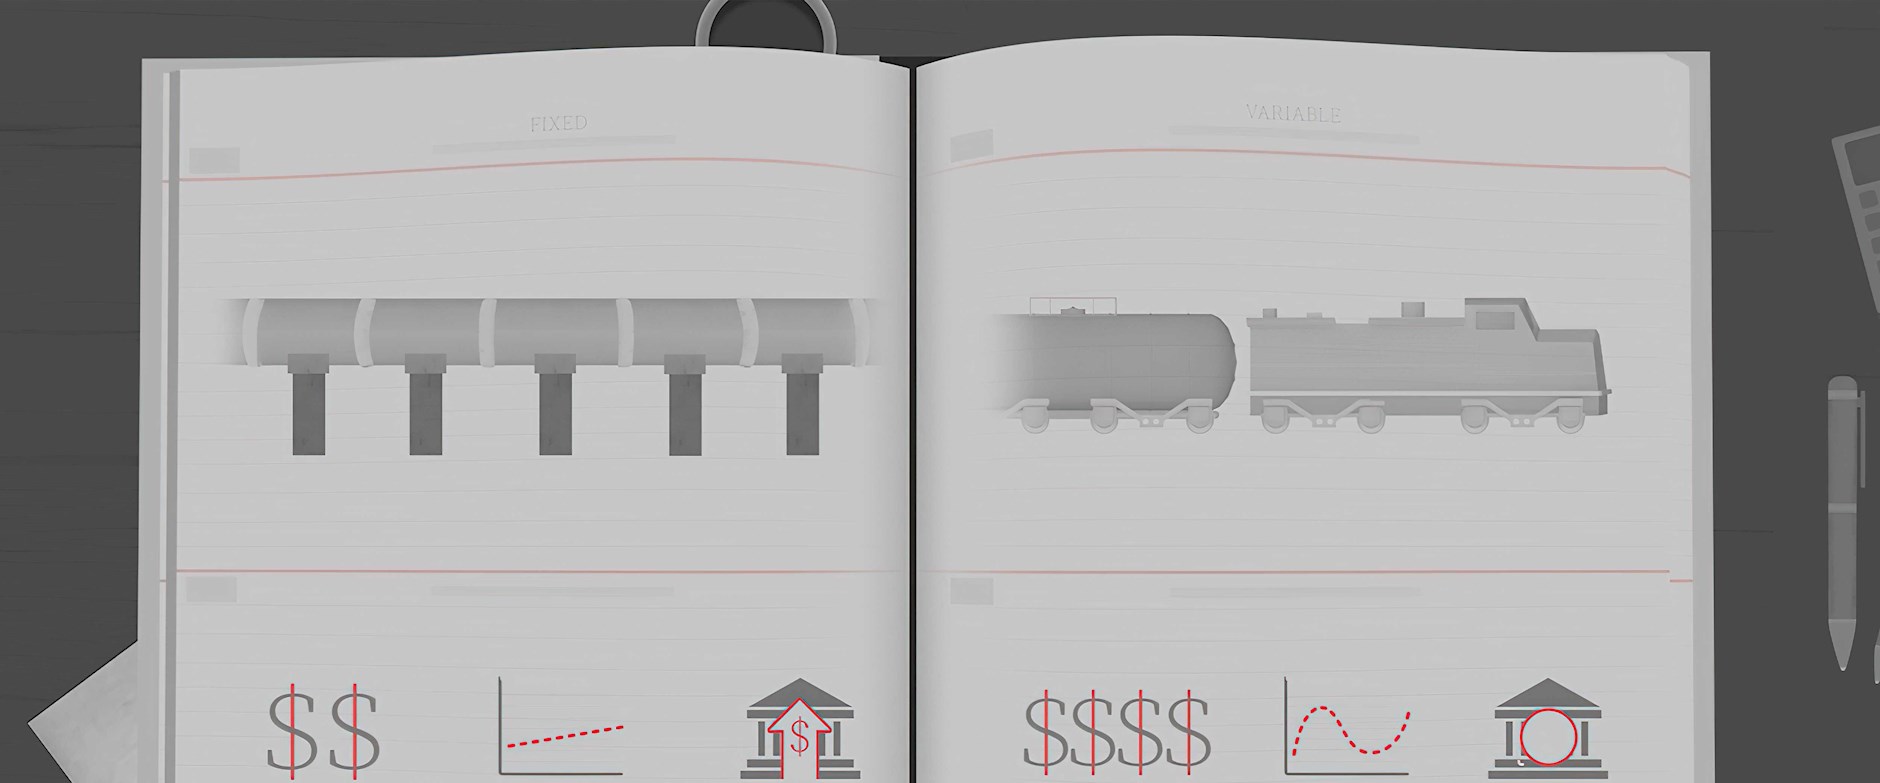 Book with rail illustrations on pages